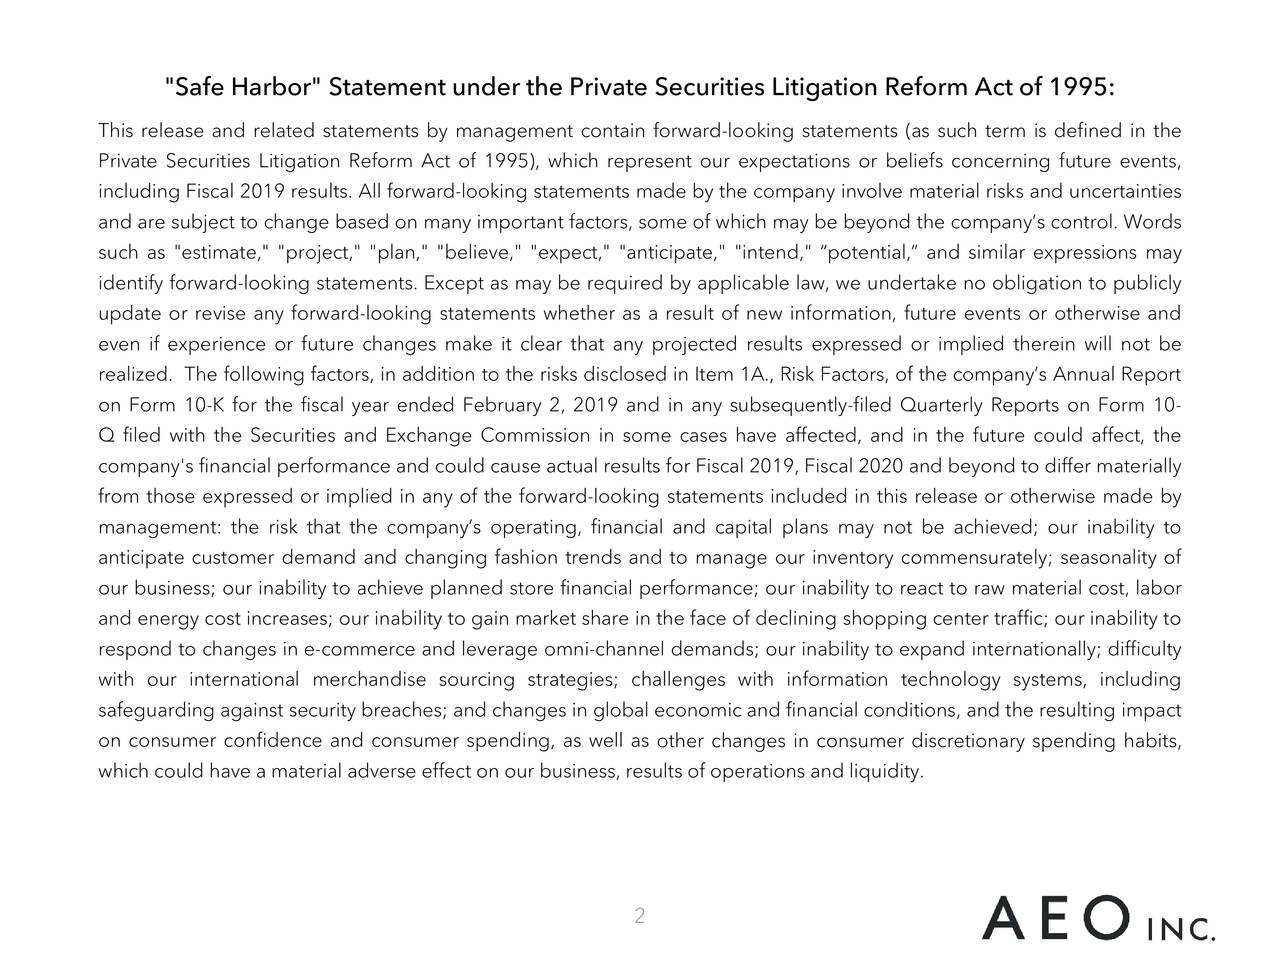 "Safe Harbor" Statement under the Private Securities Litigation Reform Act of 1995: